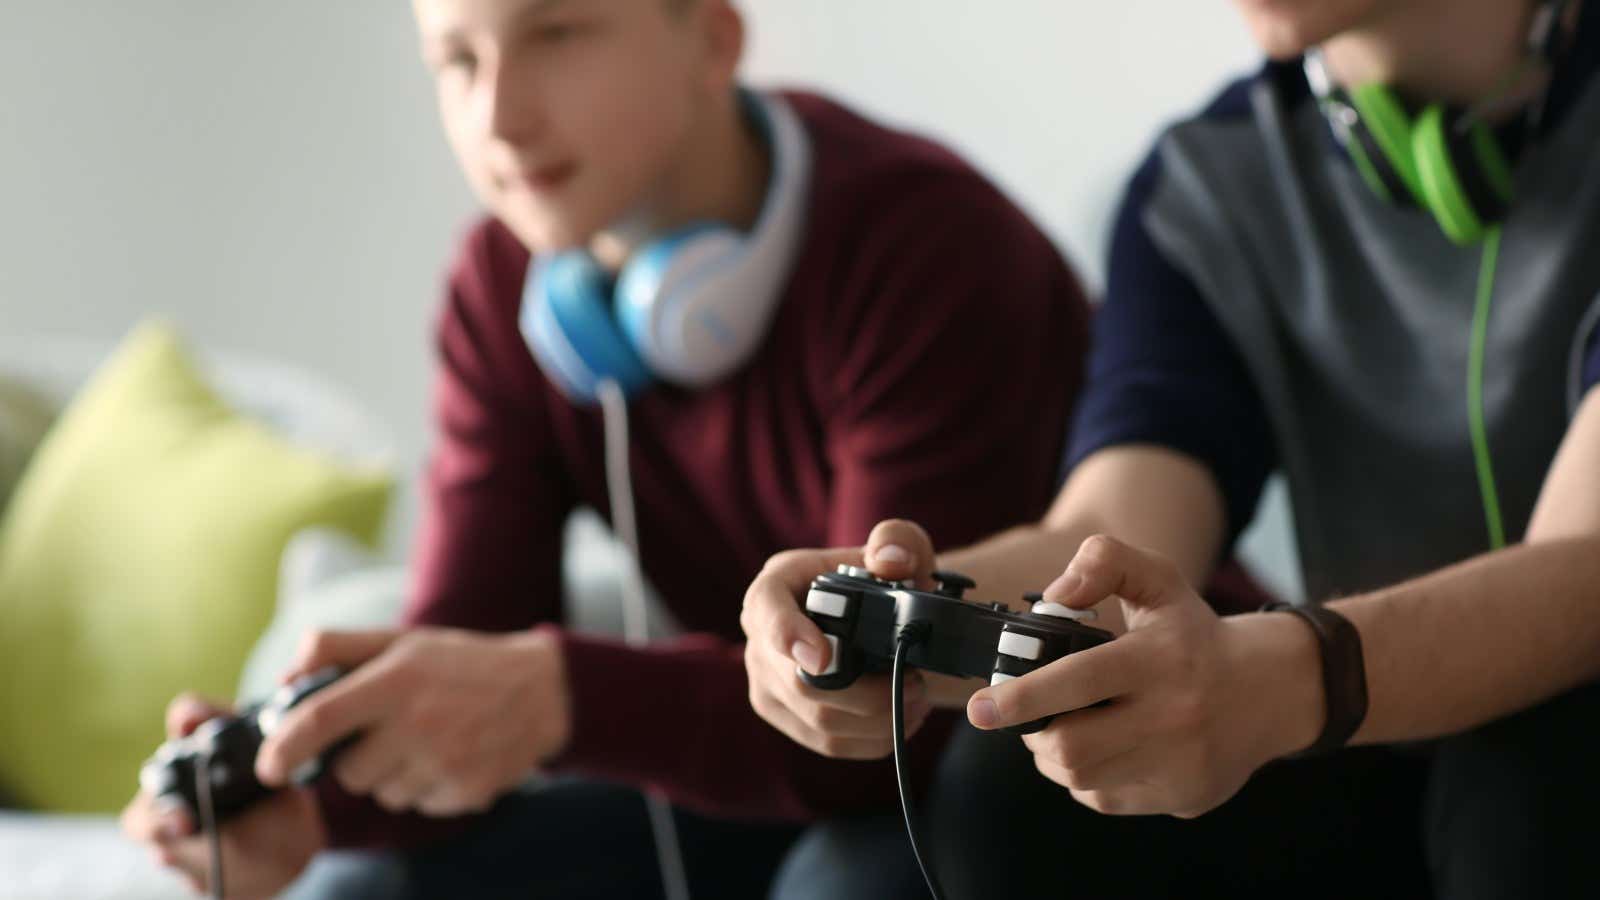 two teenagers playing video games on a gaming console